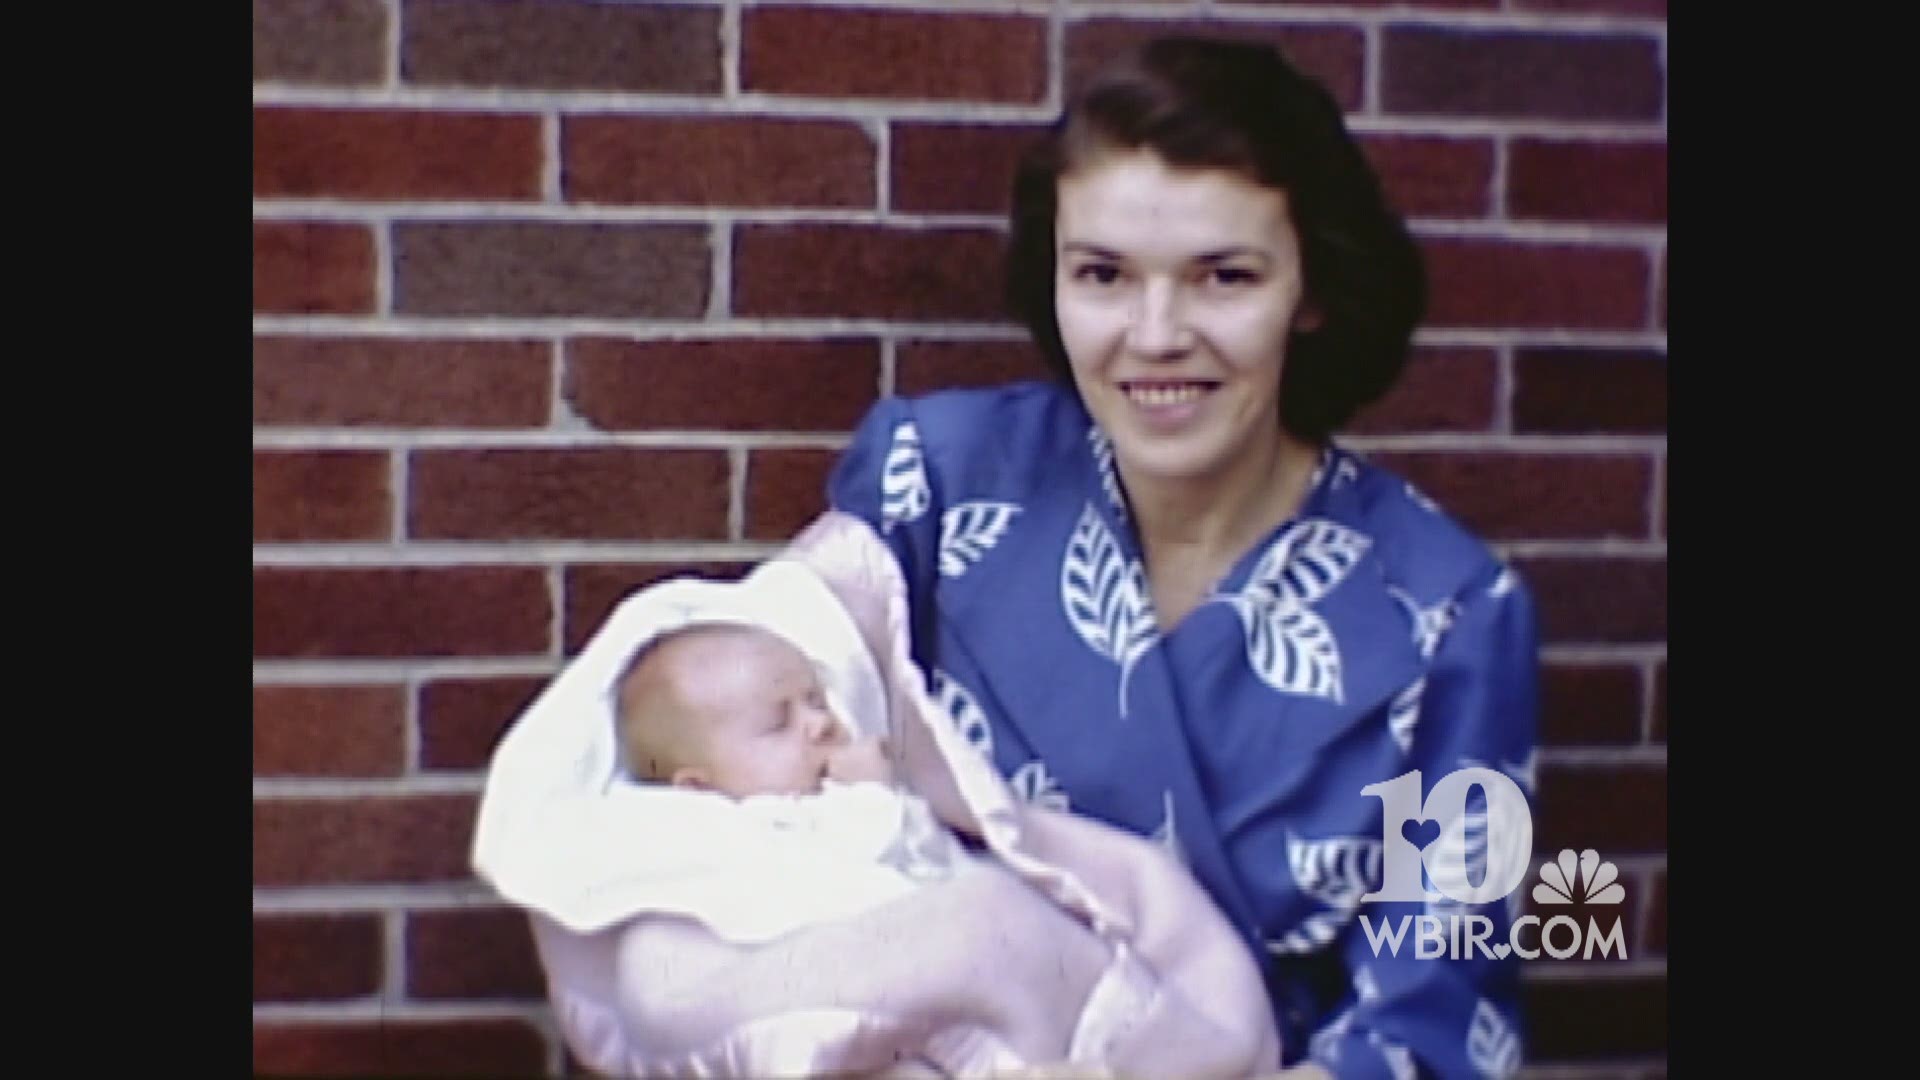 In this Hunt for History extra, see lost-and-found silent footage by Granville Hunt of his daughter, Karen, from a newborn in 1945 to a 1-year-old in 1946.